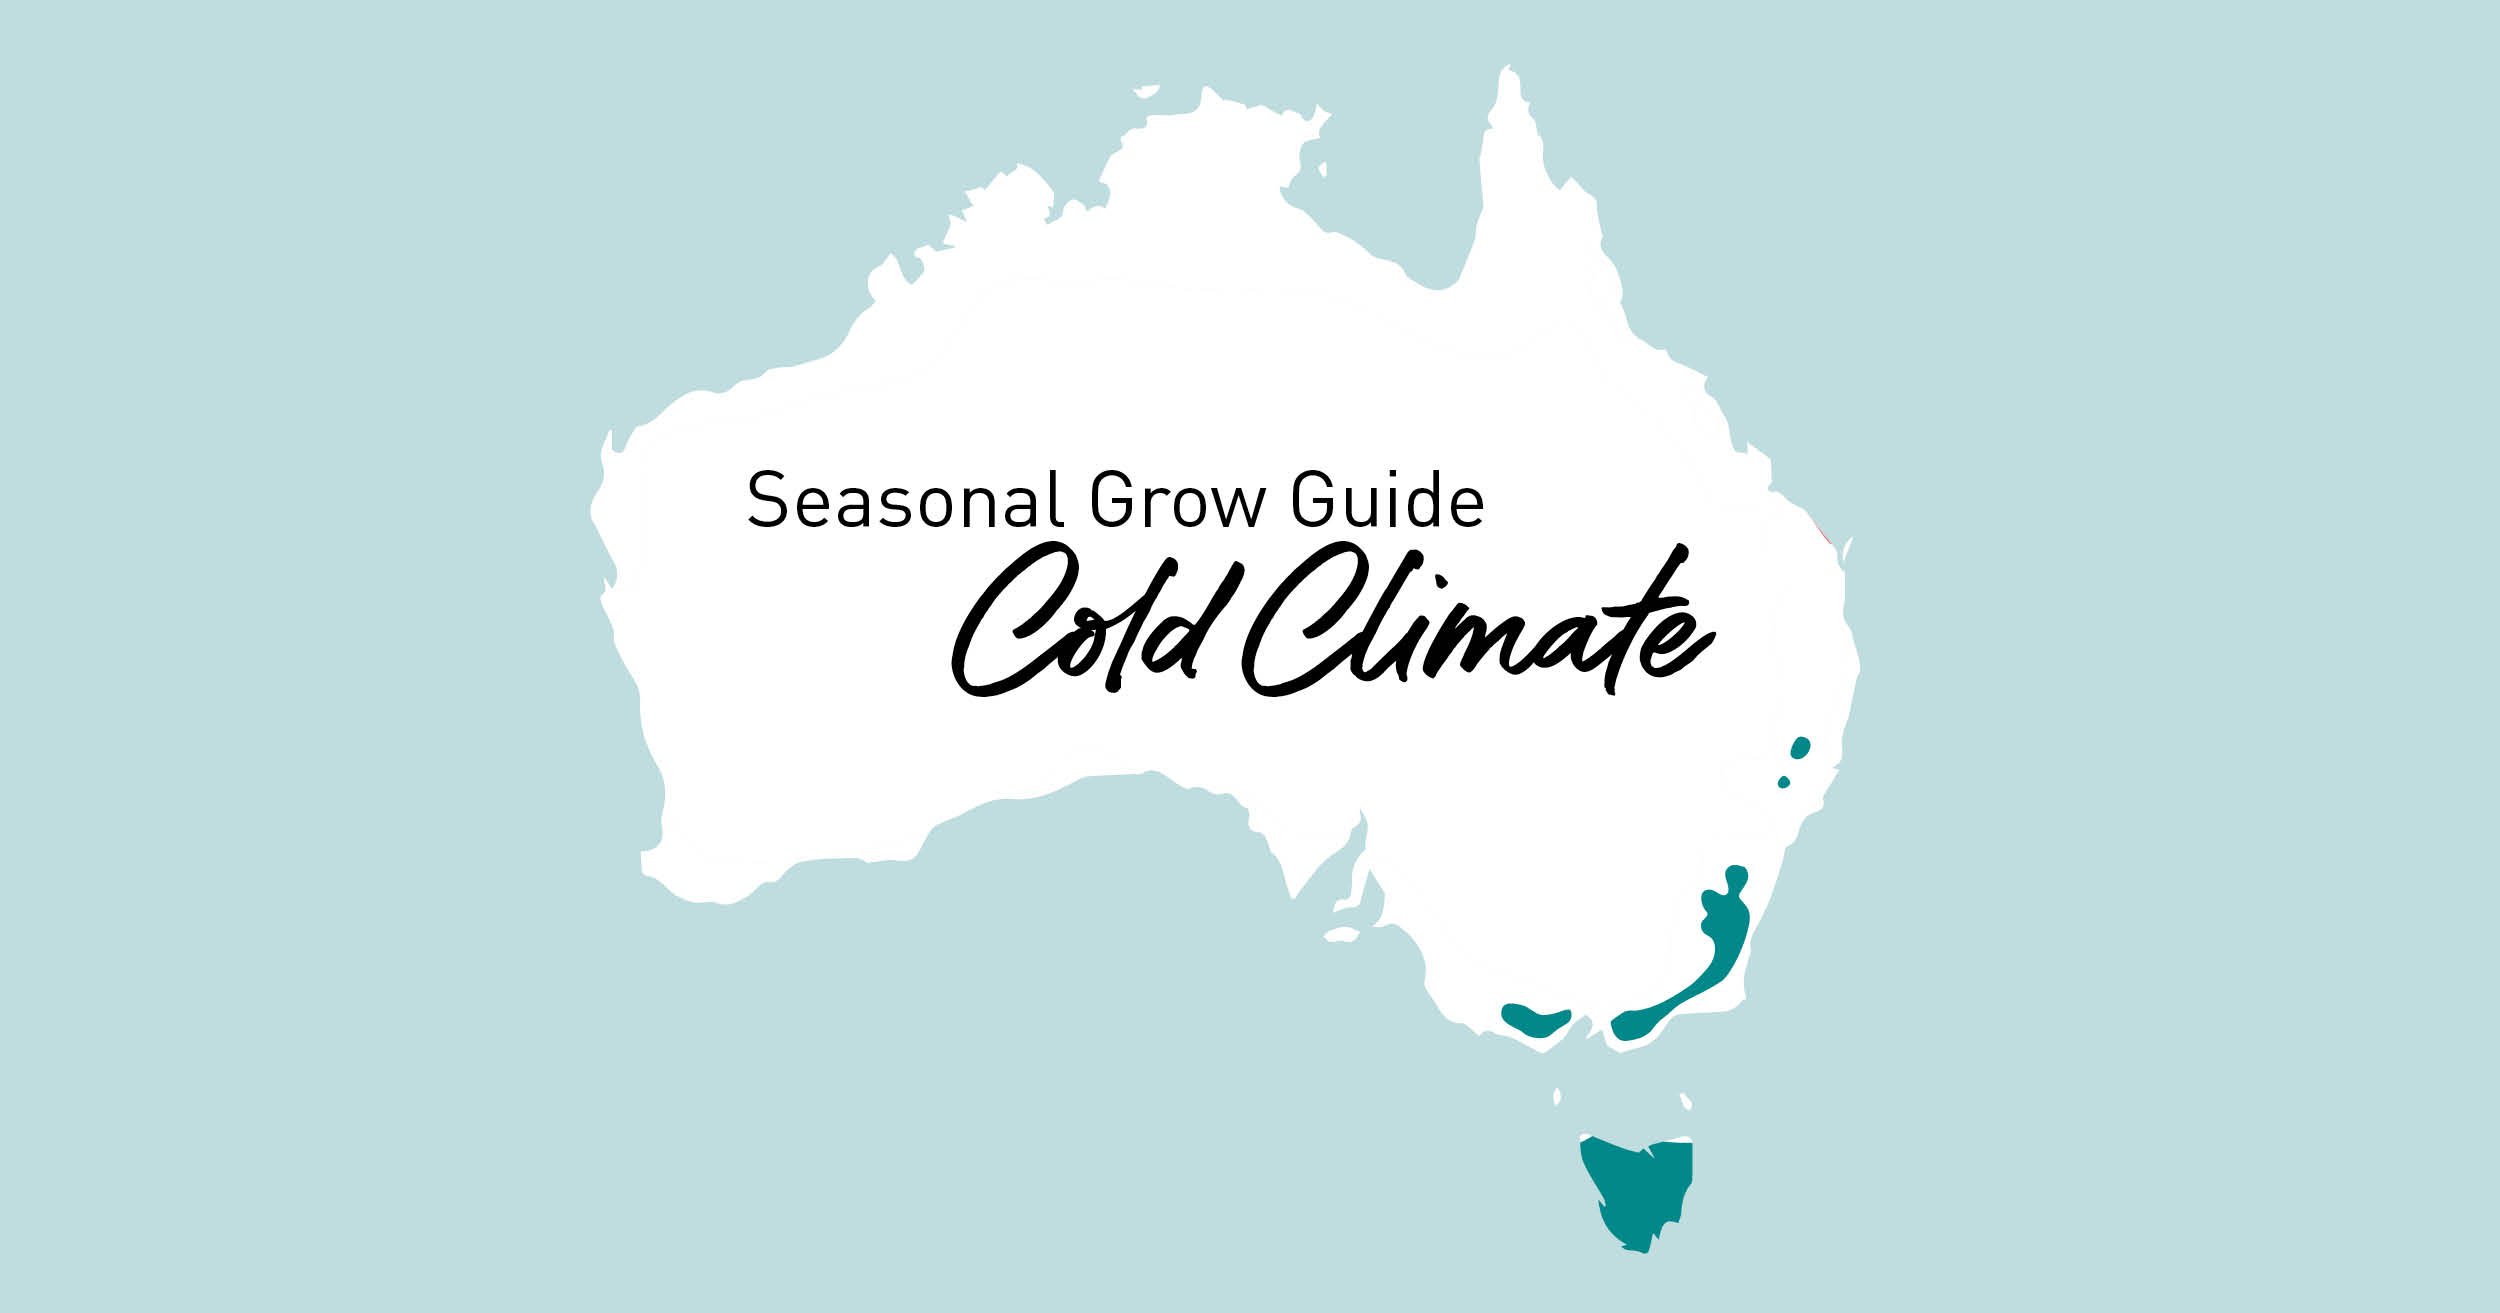 Seasonal Grow Guide in Australia cold climate 